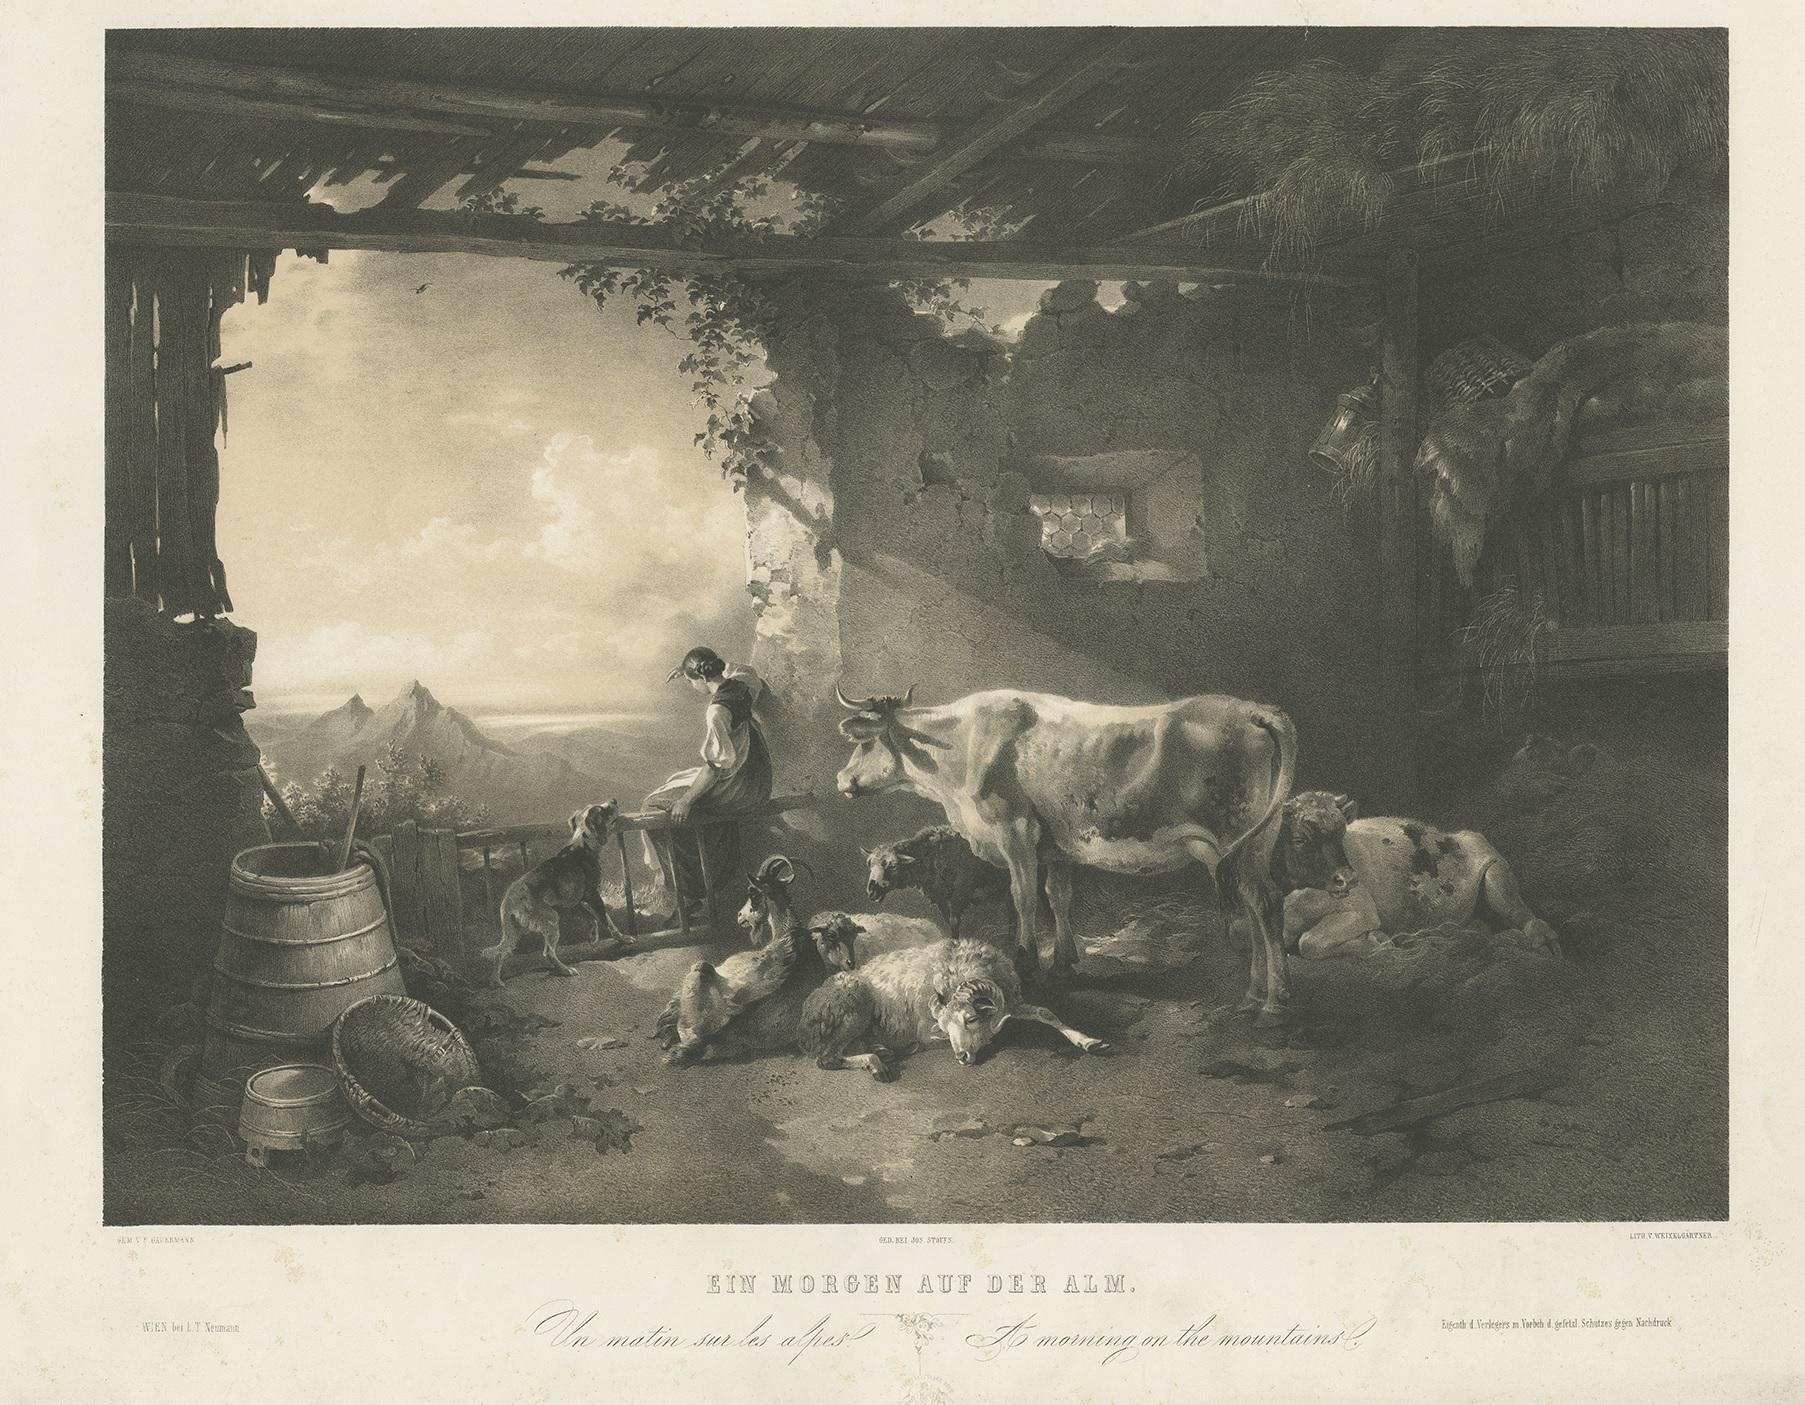 Antique print titled 'Ein Morgen auf der Alm - Un matin sur les Alpes - A morning on the Mountains'. Large antique print of a morning on the mountains, showing a scene with a girl, dog and cattle. Lithographed by Weixelgartner after a painting by